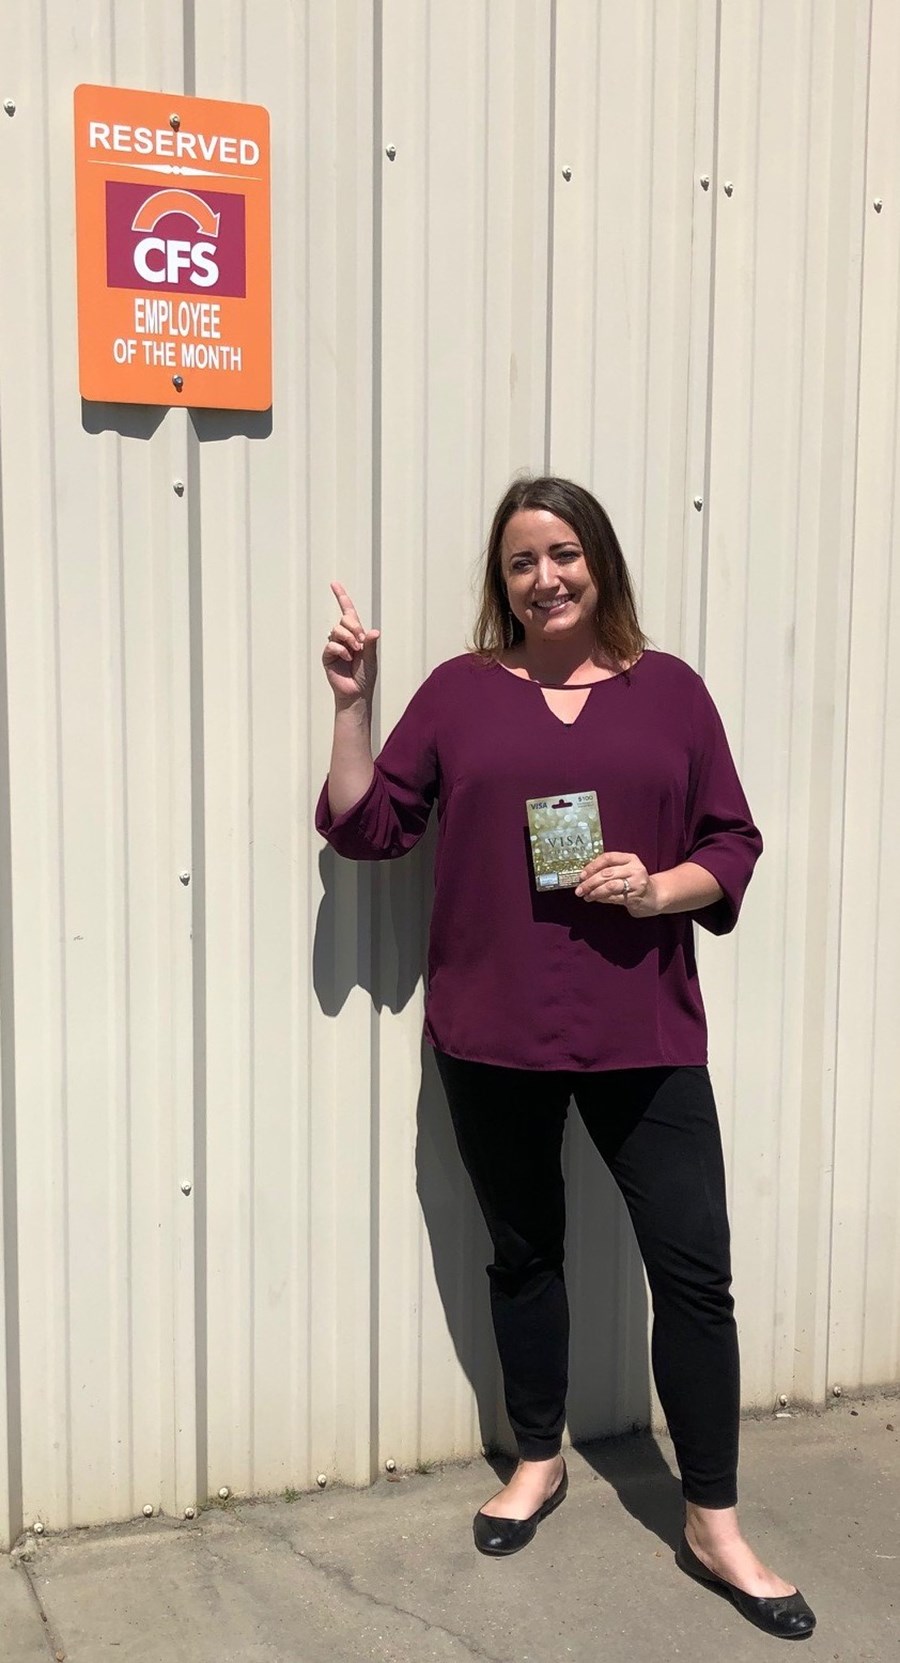 CFS Employee of the Month for March 2020 is Crystal Yeckley!